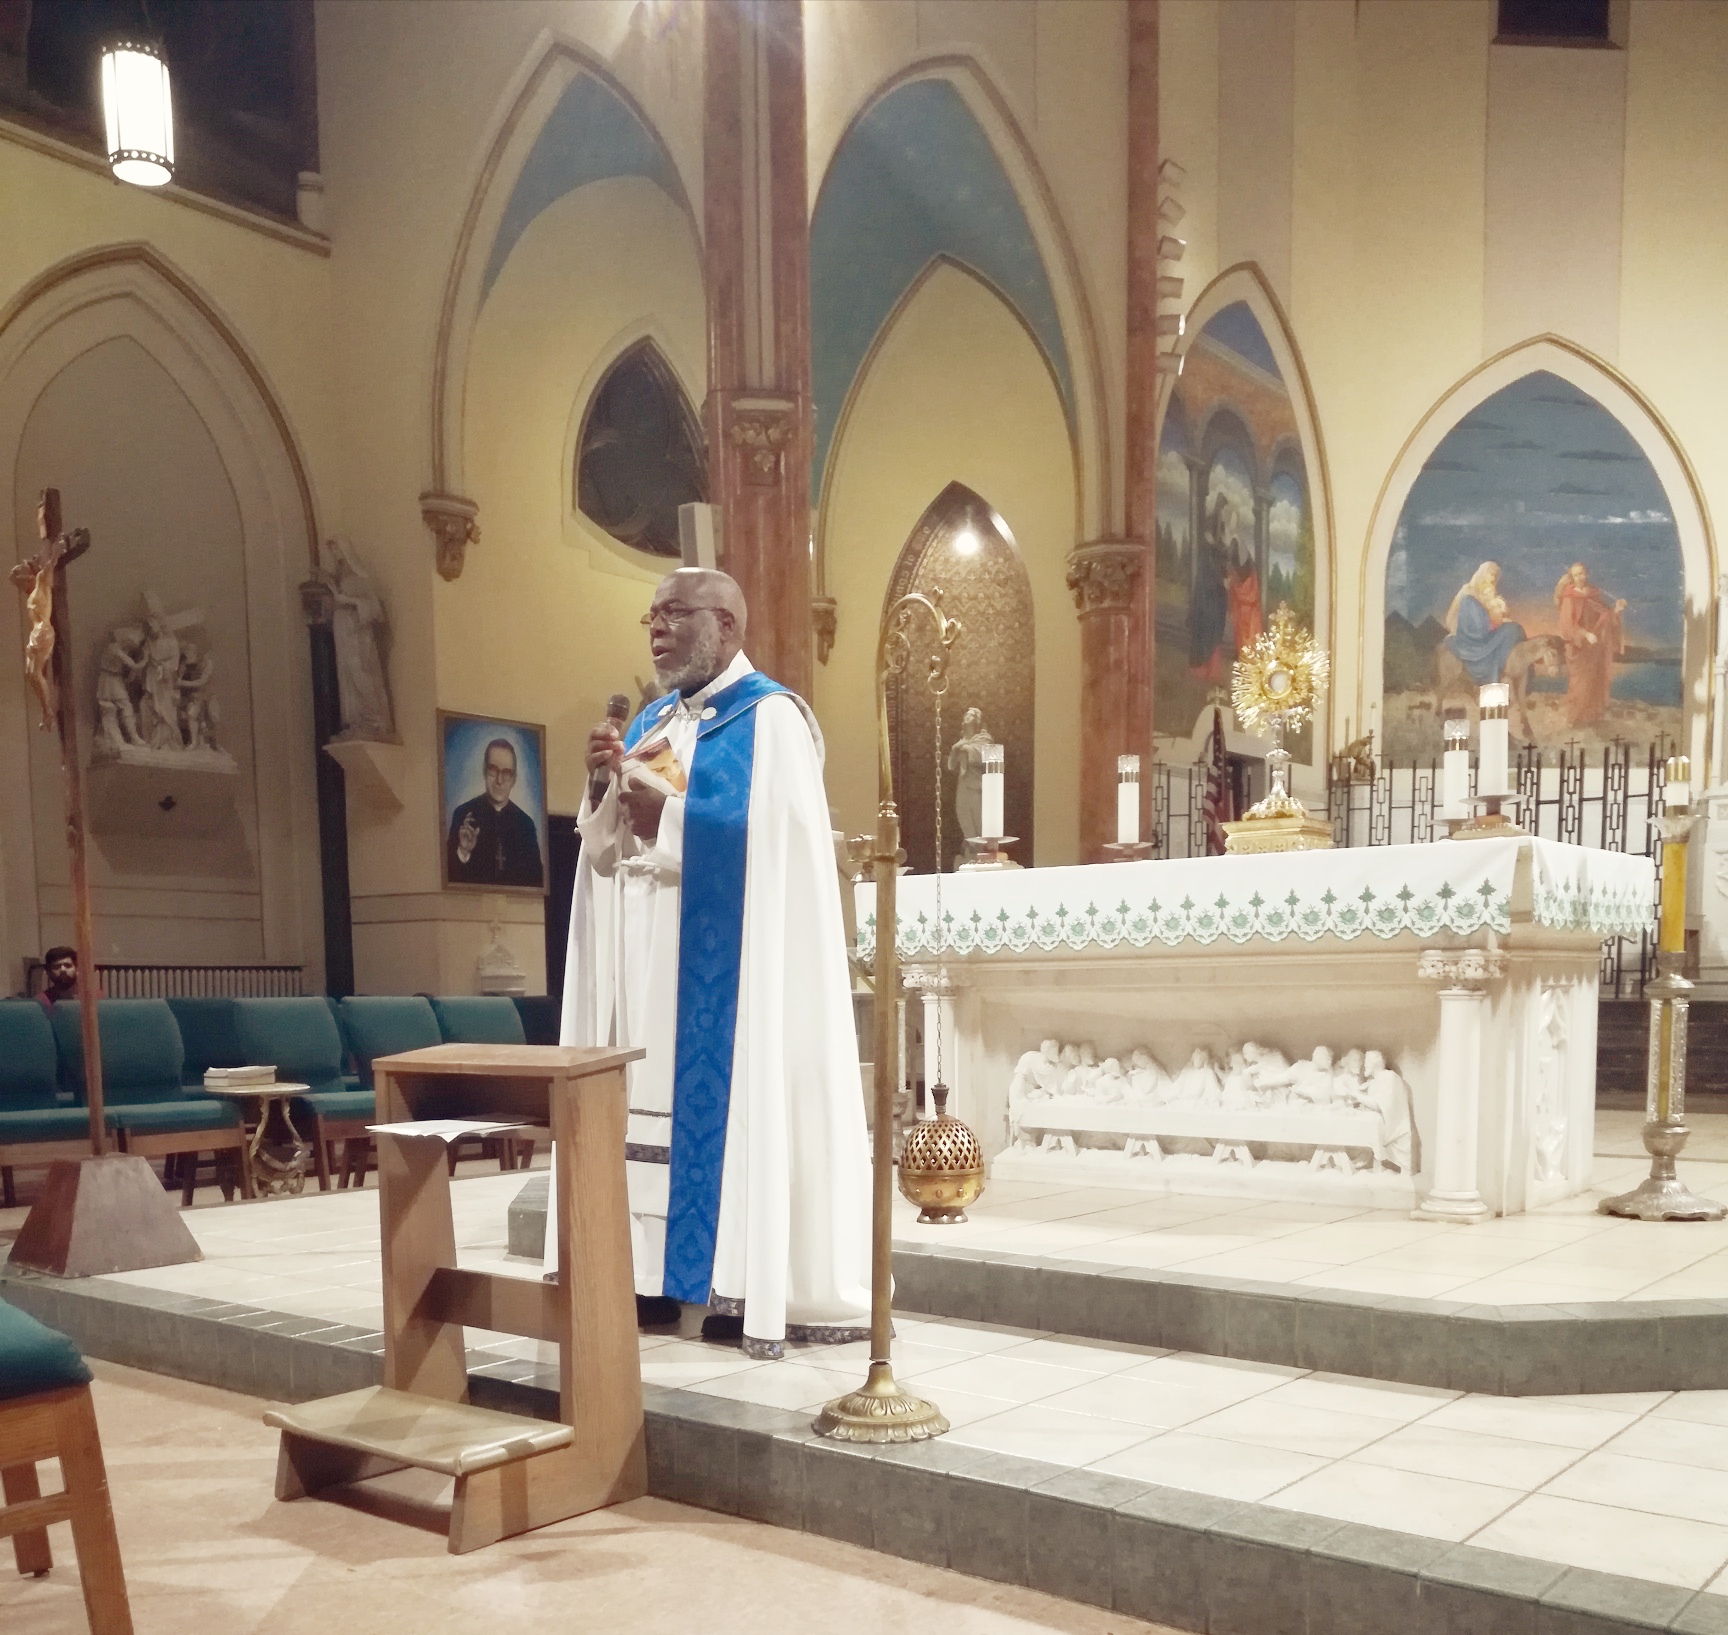 A priest standing in front of a pulpit in a church.